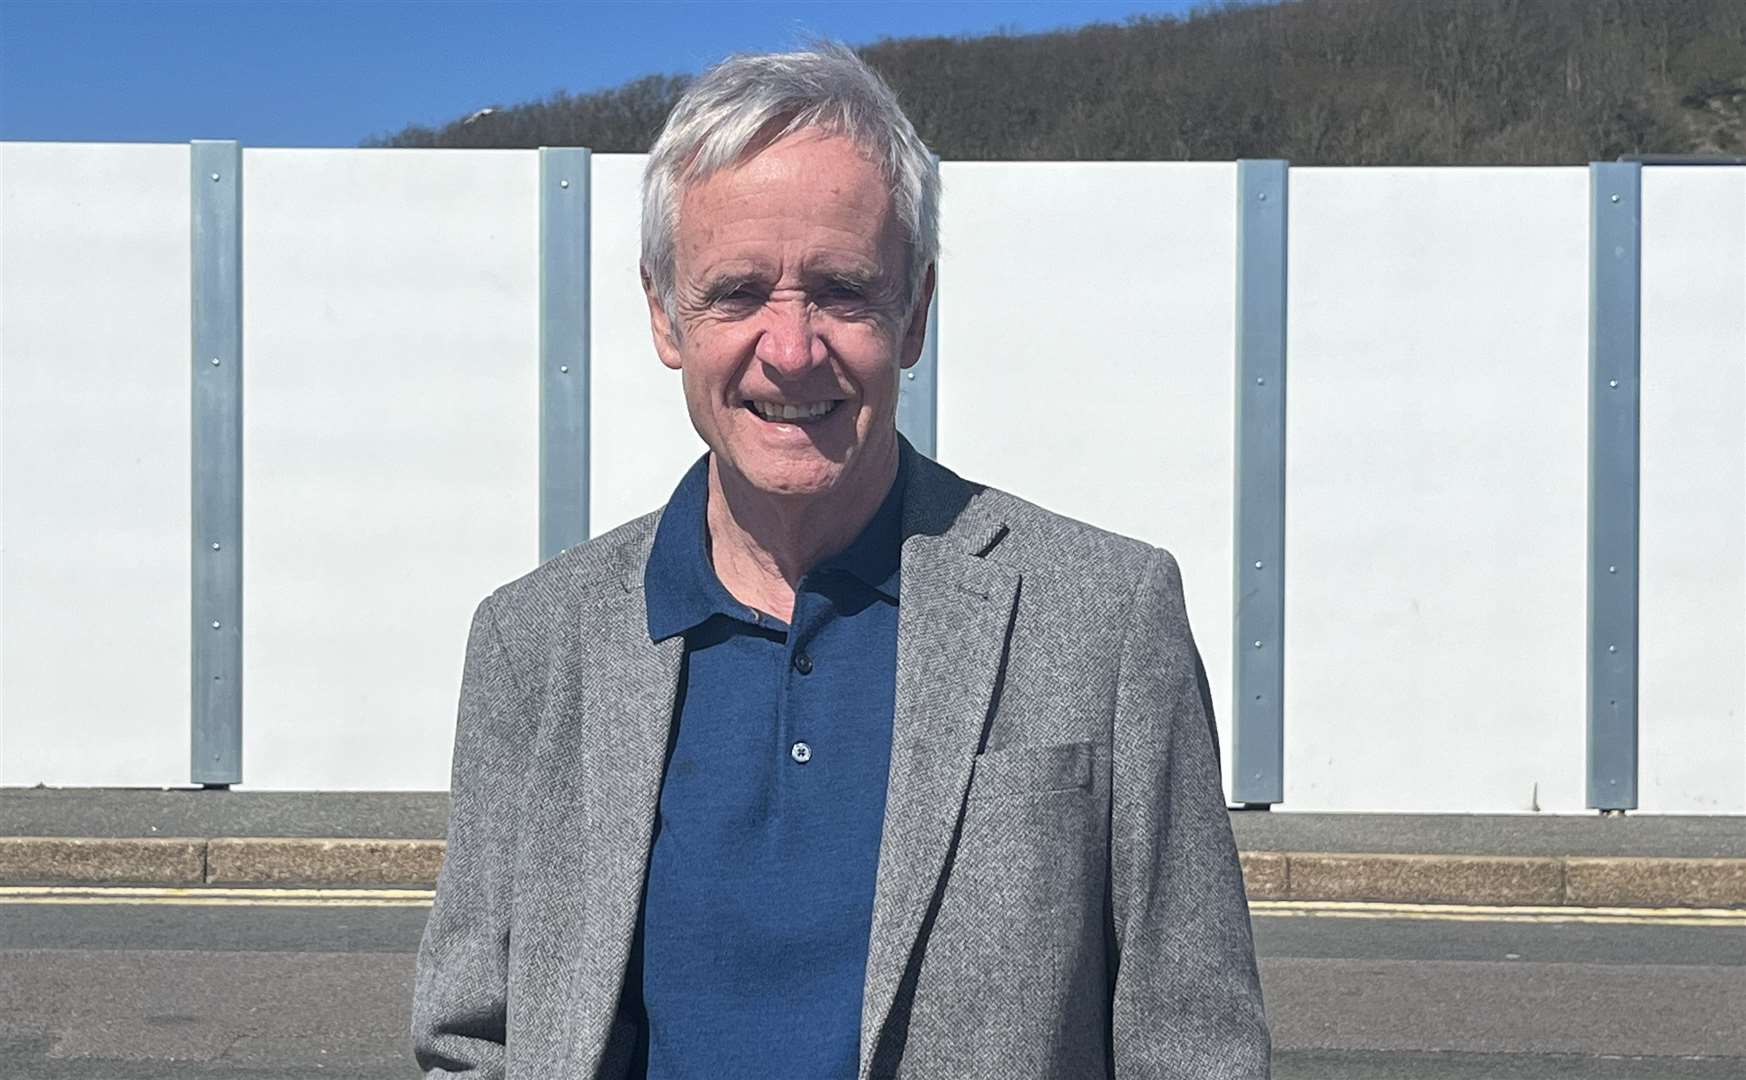 Cllr Jim Martin (Green) has been in charge of Folkestone and Hythe District Council since May 2023; he’s pictured by the hoardings at Princes Parade in Hythe which were taken down earlier this year